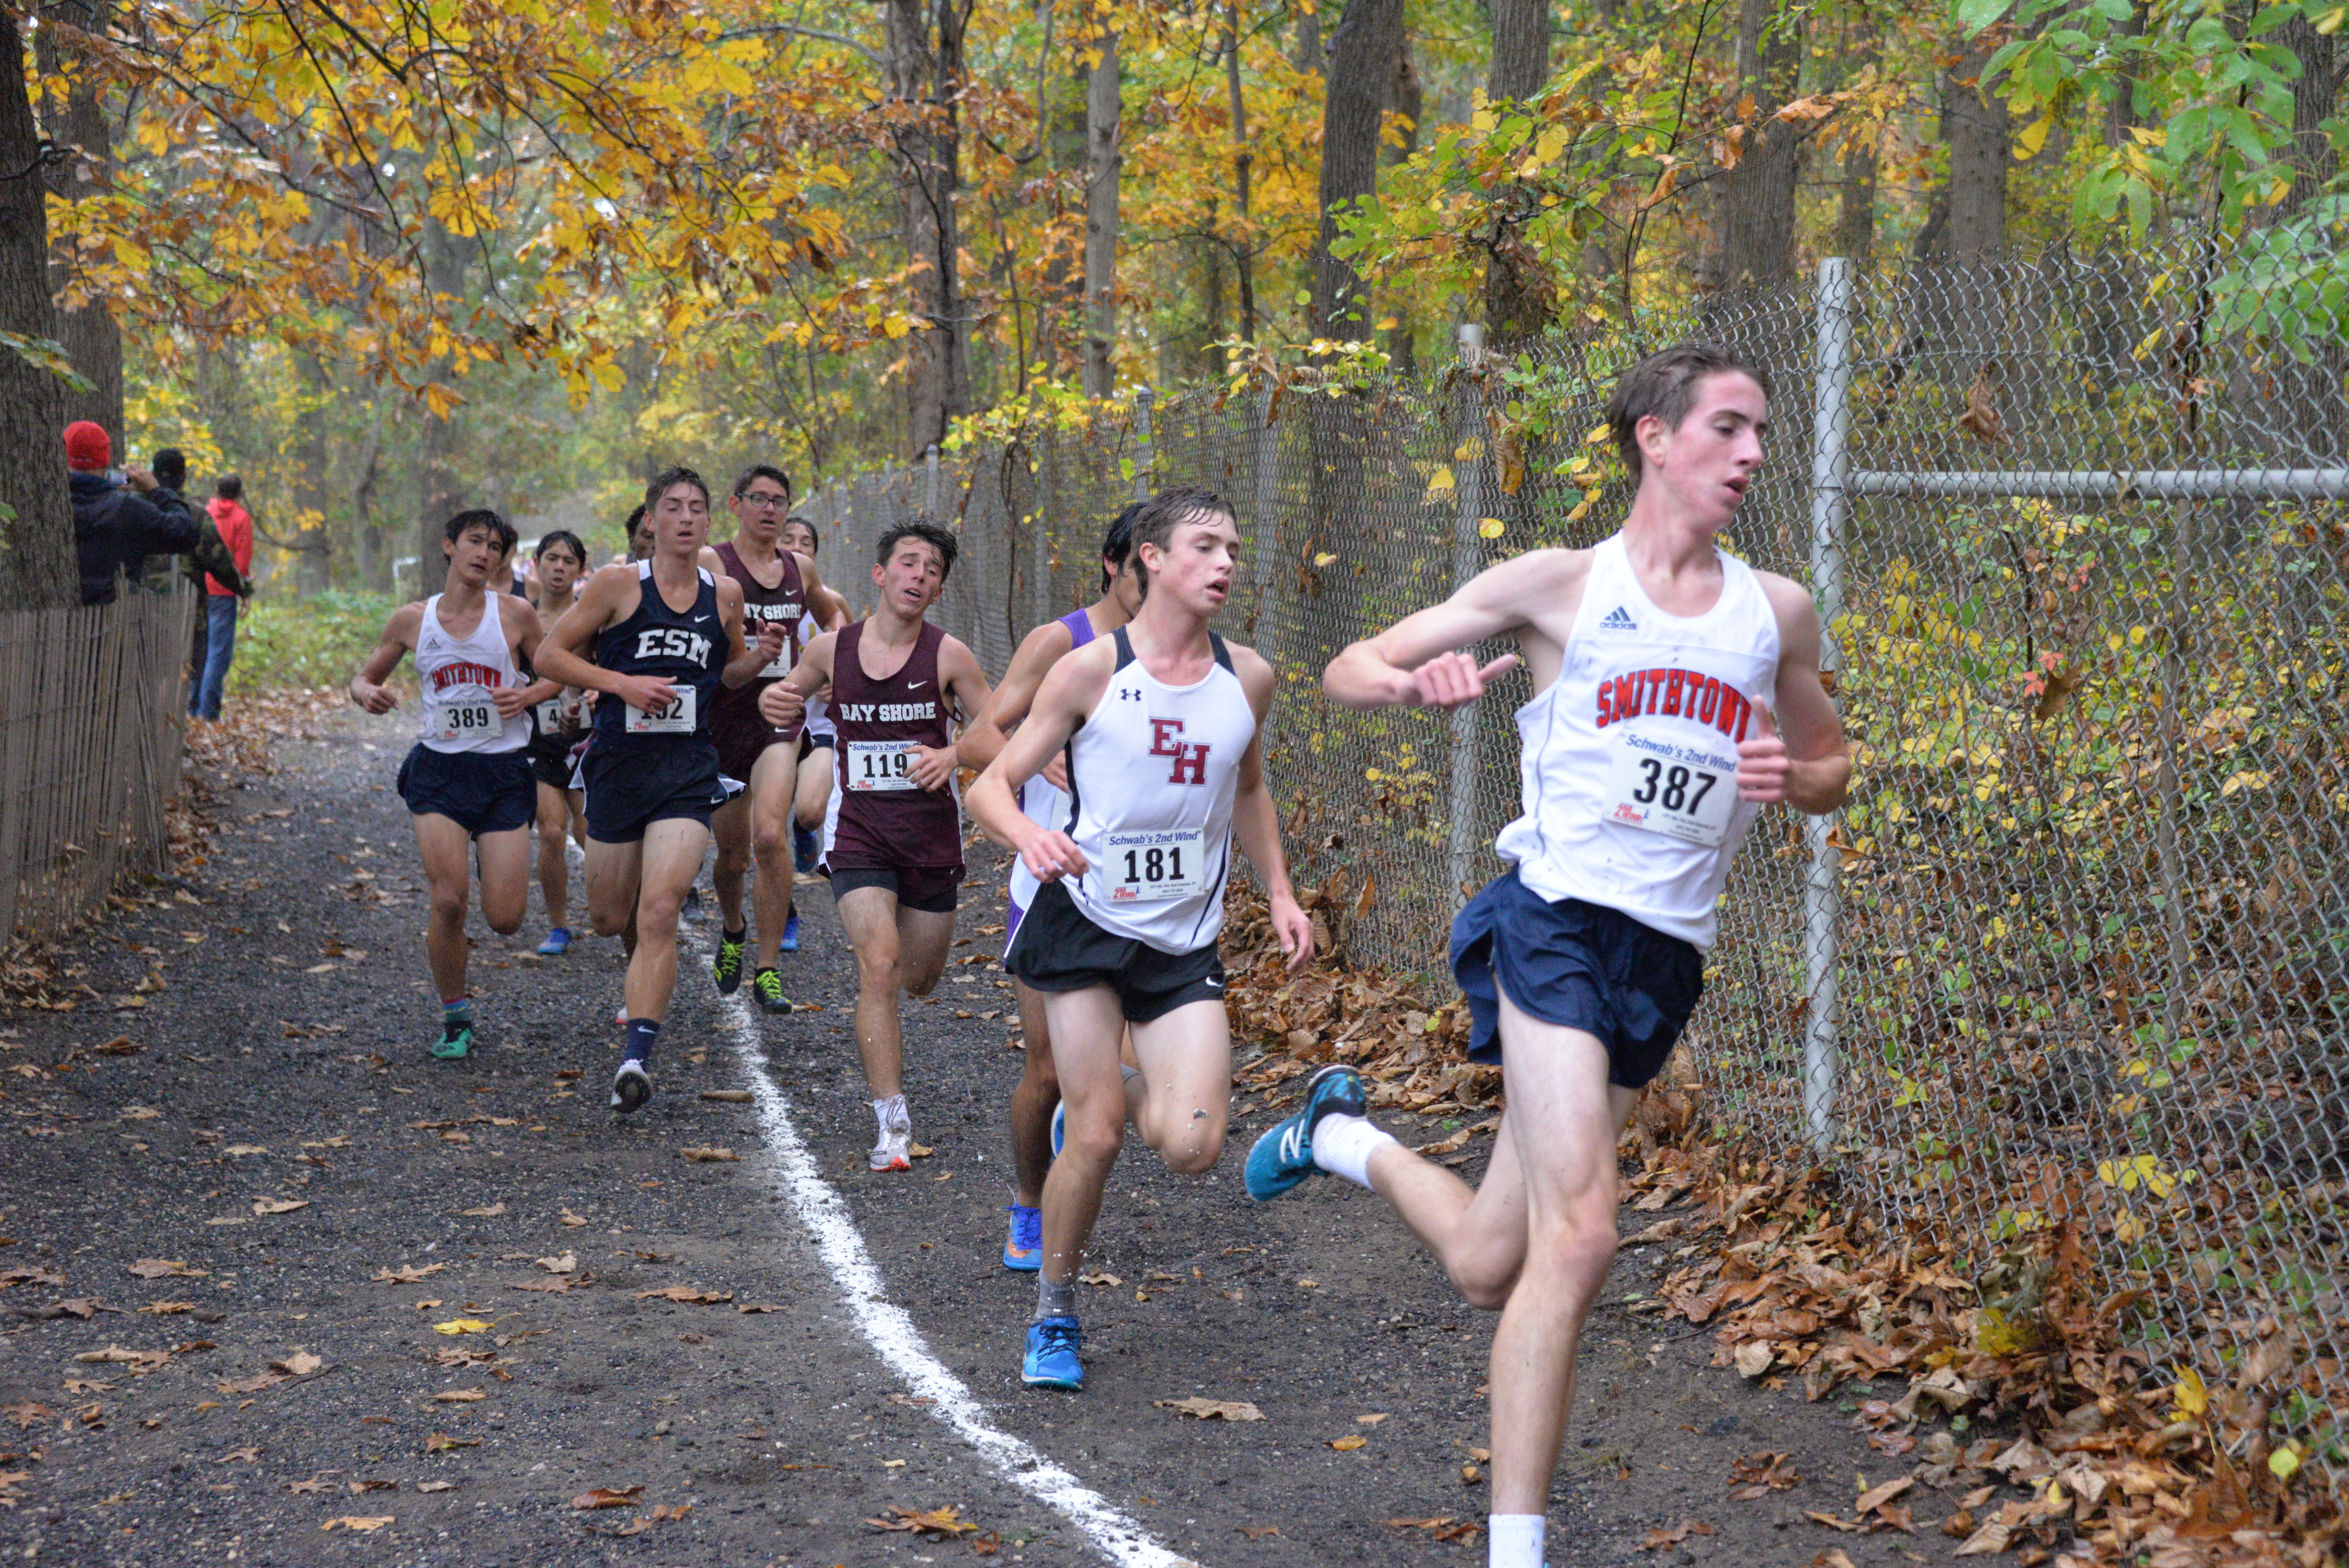 East Hampton sophomore Evan Masi finished third in Division III on October 29.